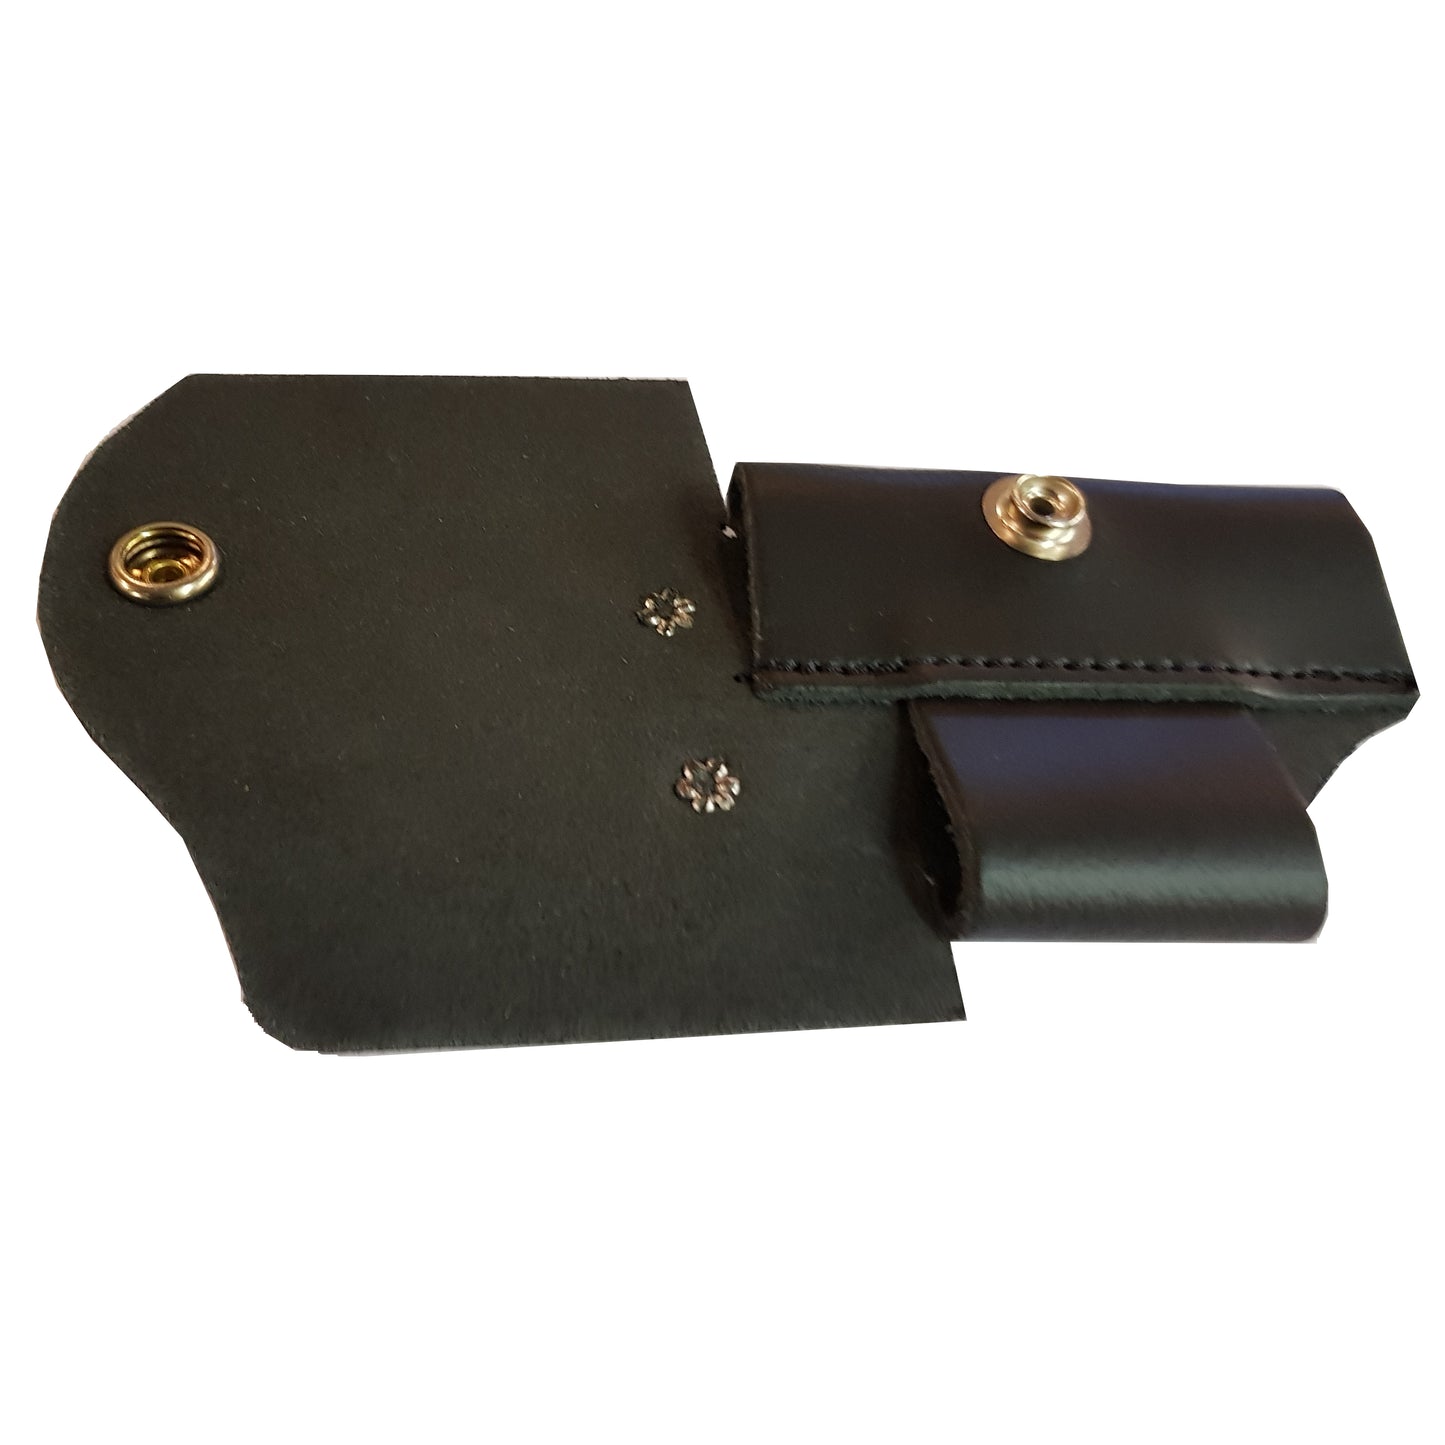 Open black leather traction key holder with press stud